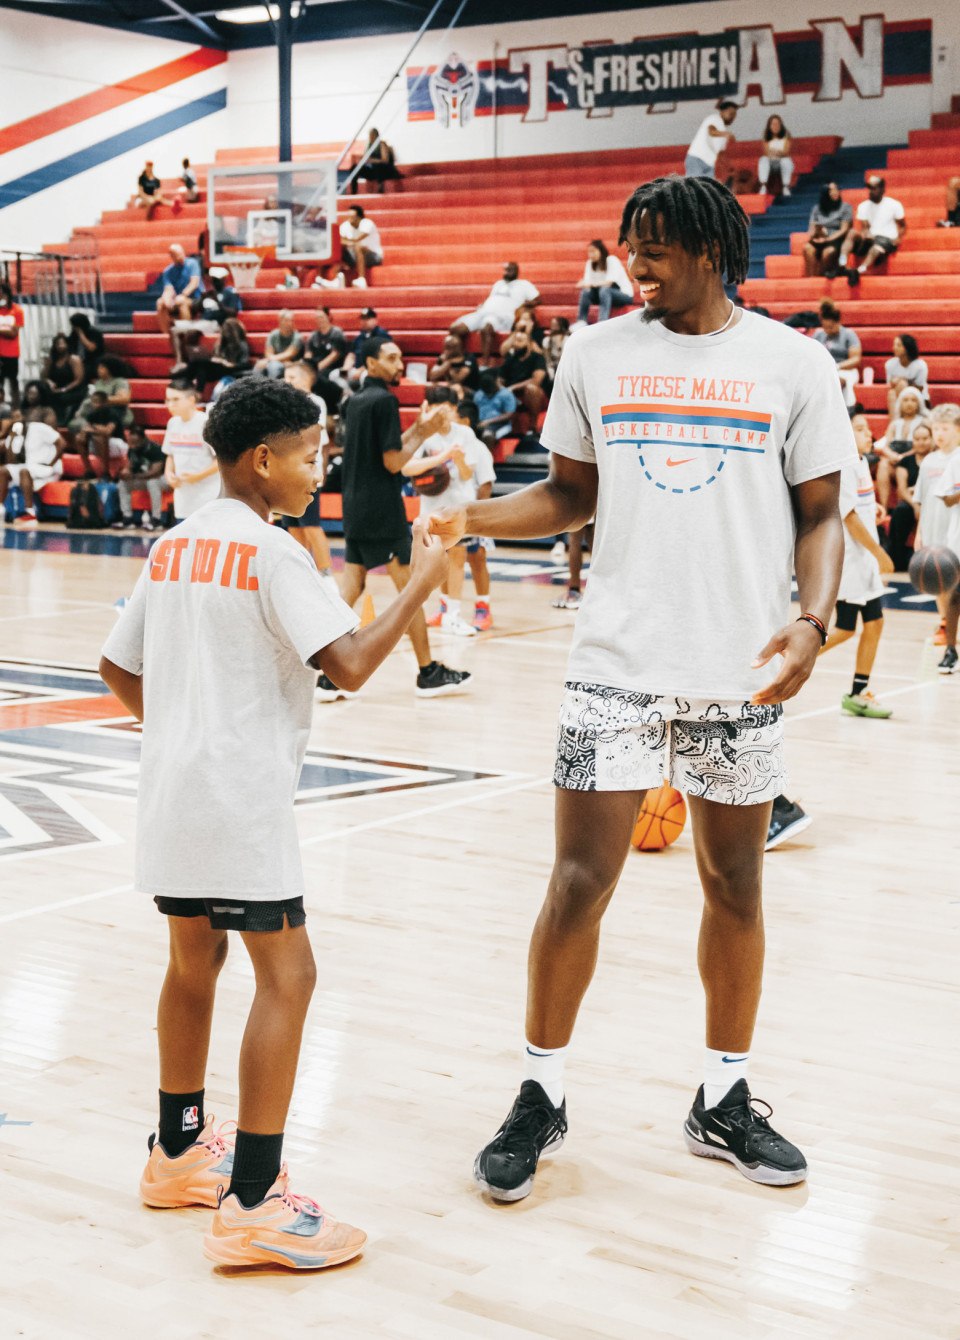 Tyrese Maxey's development gives Sixers a chance to hit highest ceiling